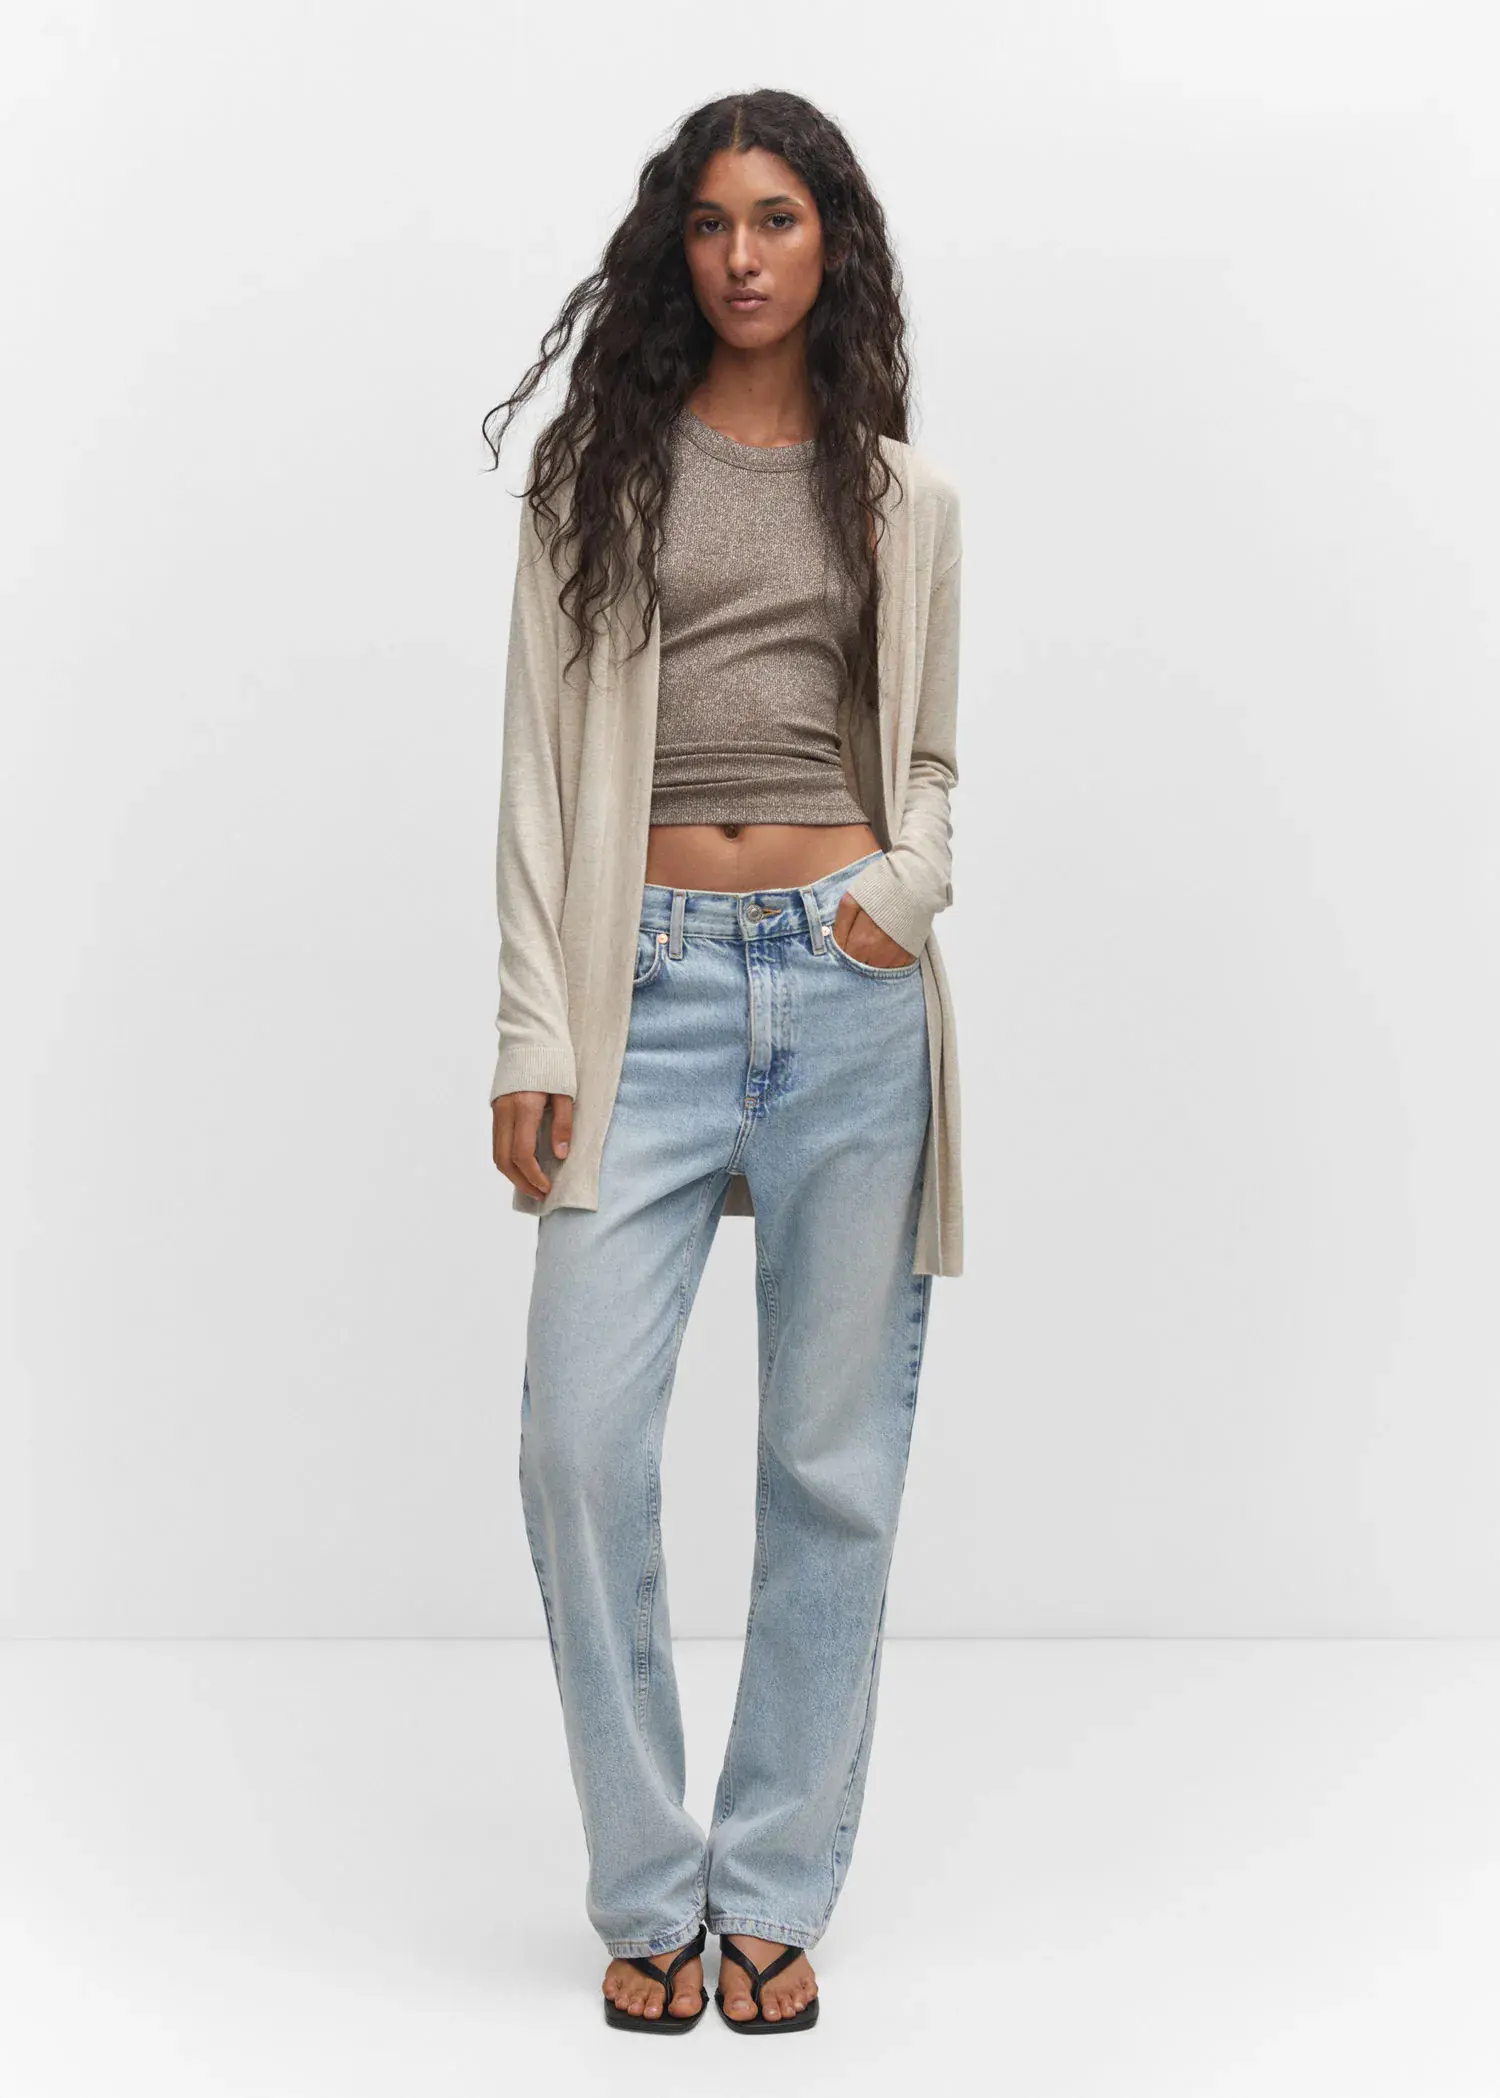 Mango Fine-knit cardigan. a woman in a tan top and jeans. 